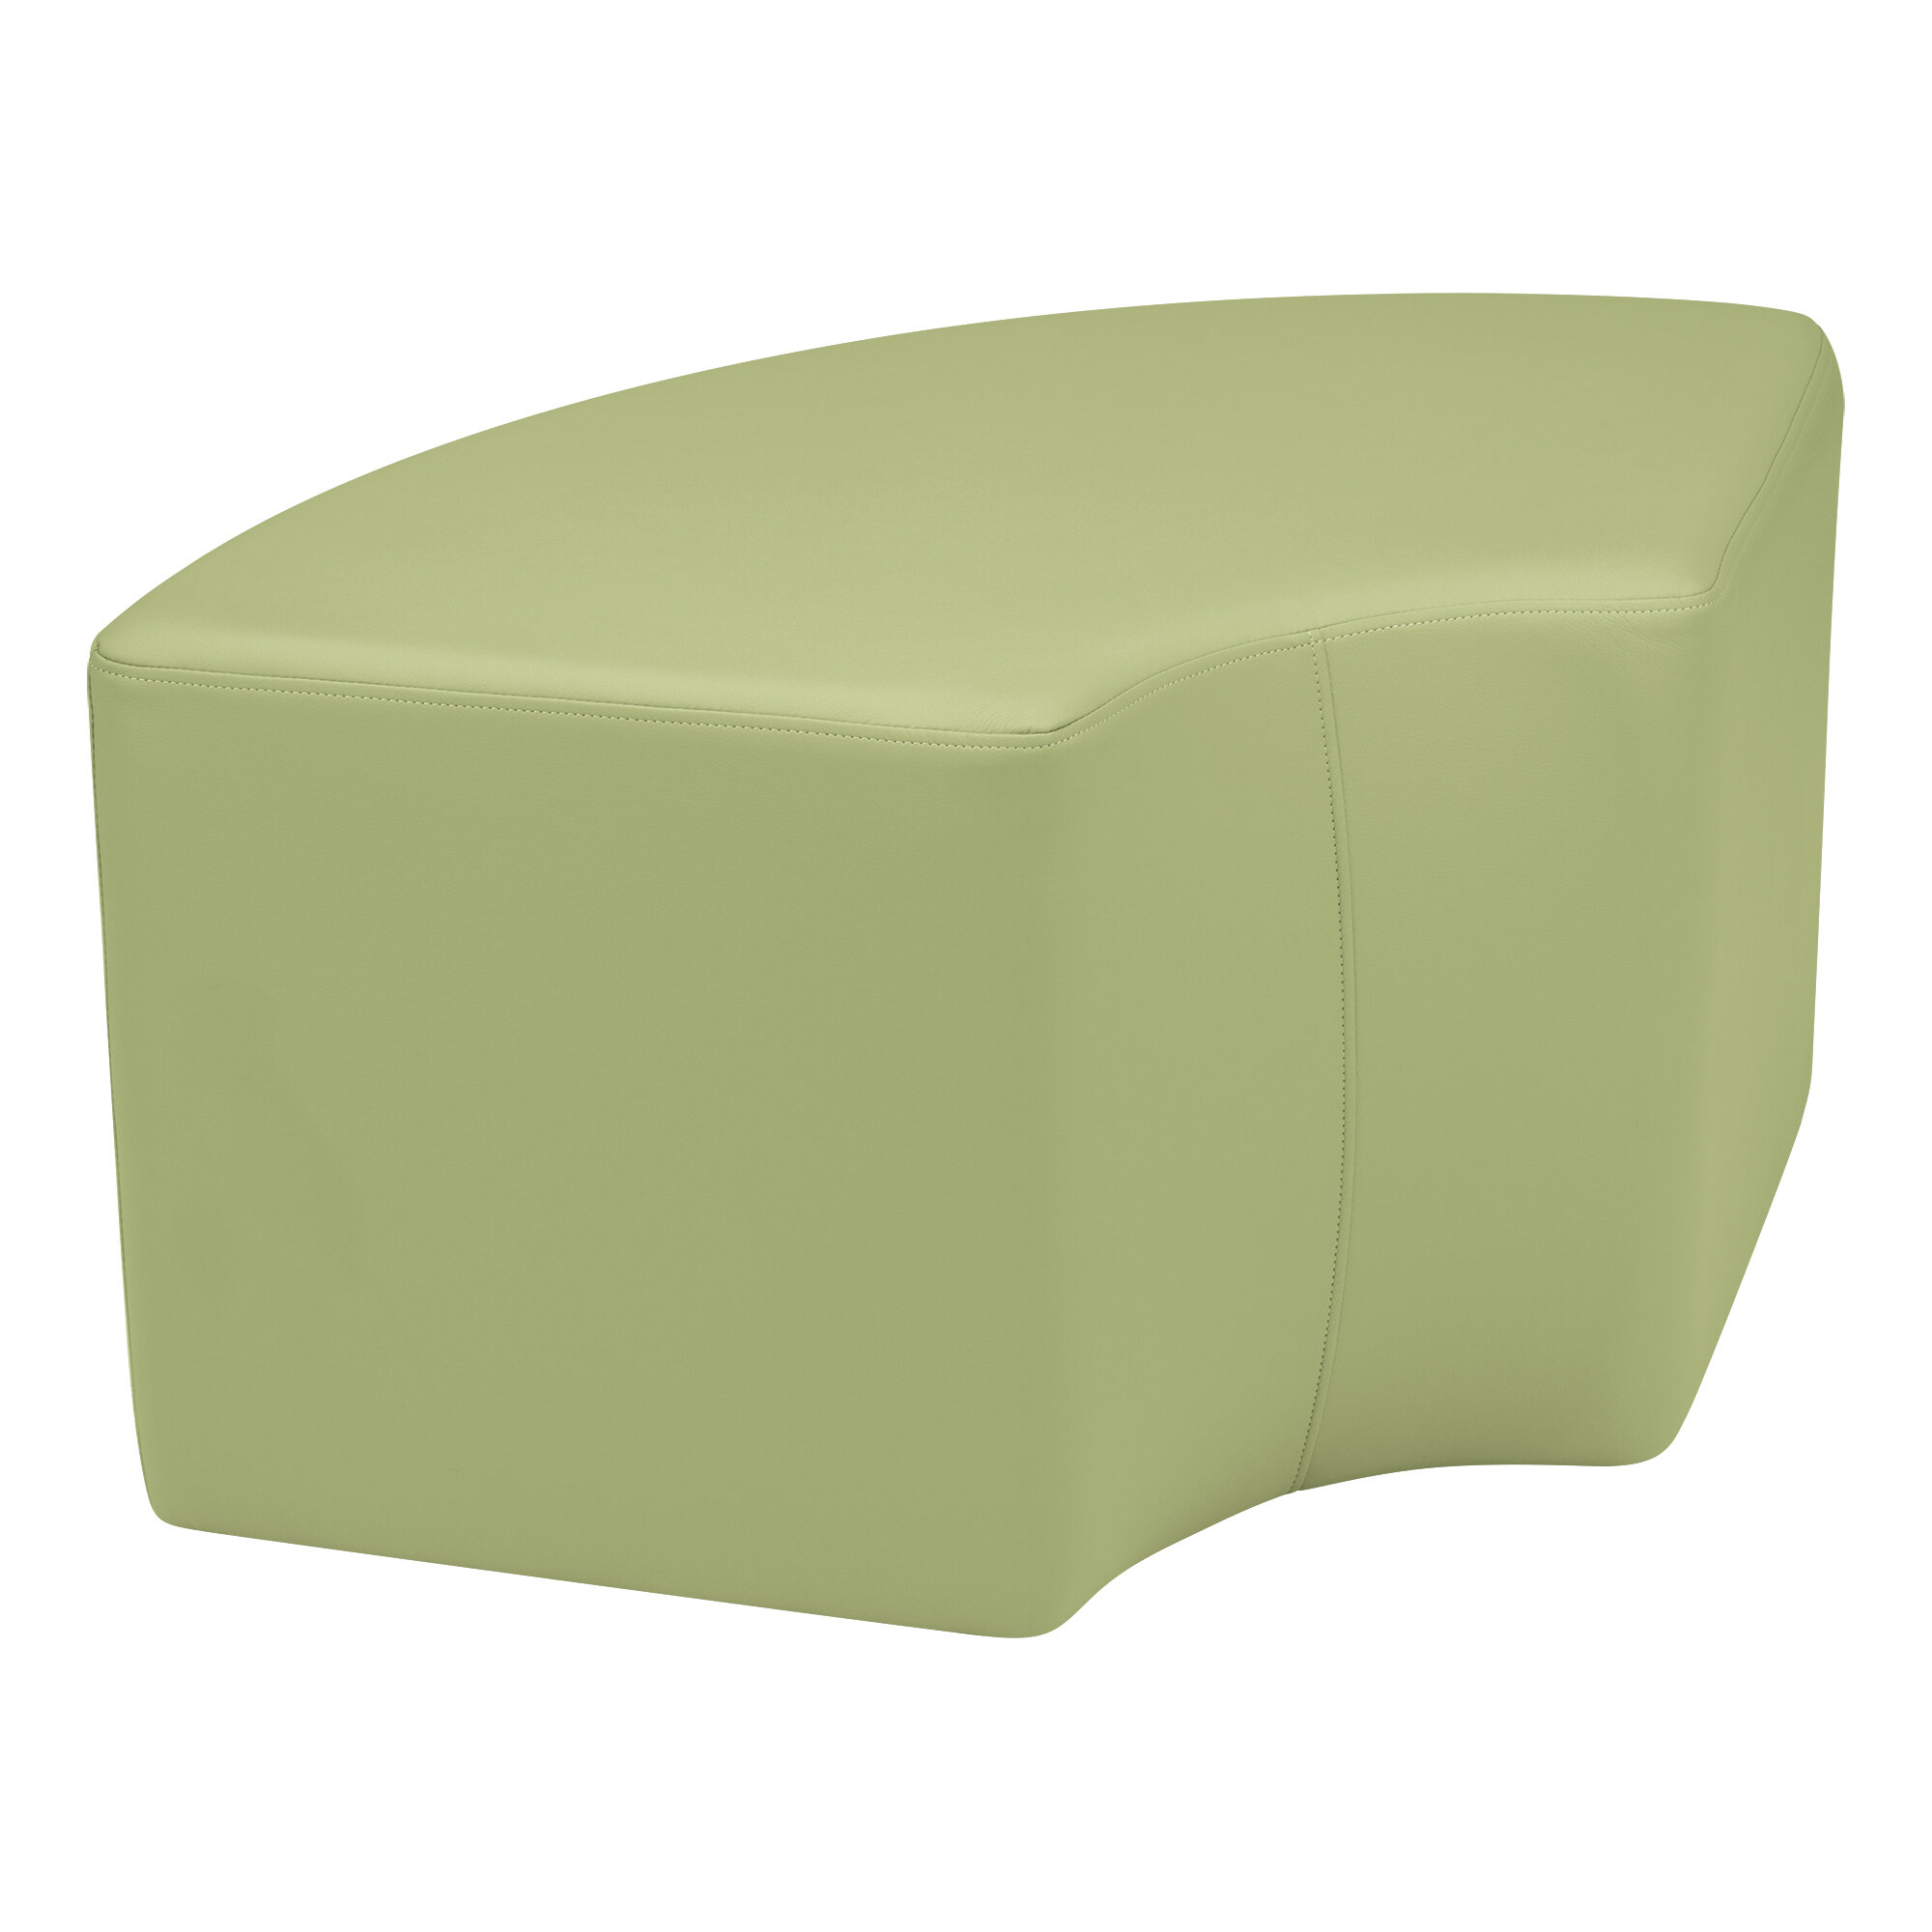 Learniture Shapes Vinyl Soft Seating 1/4 Round 18 